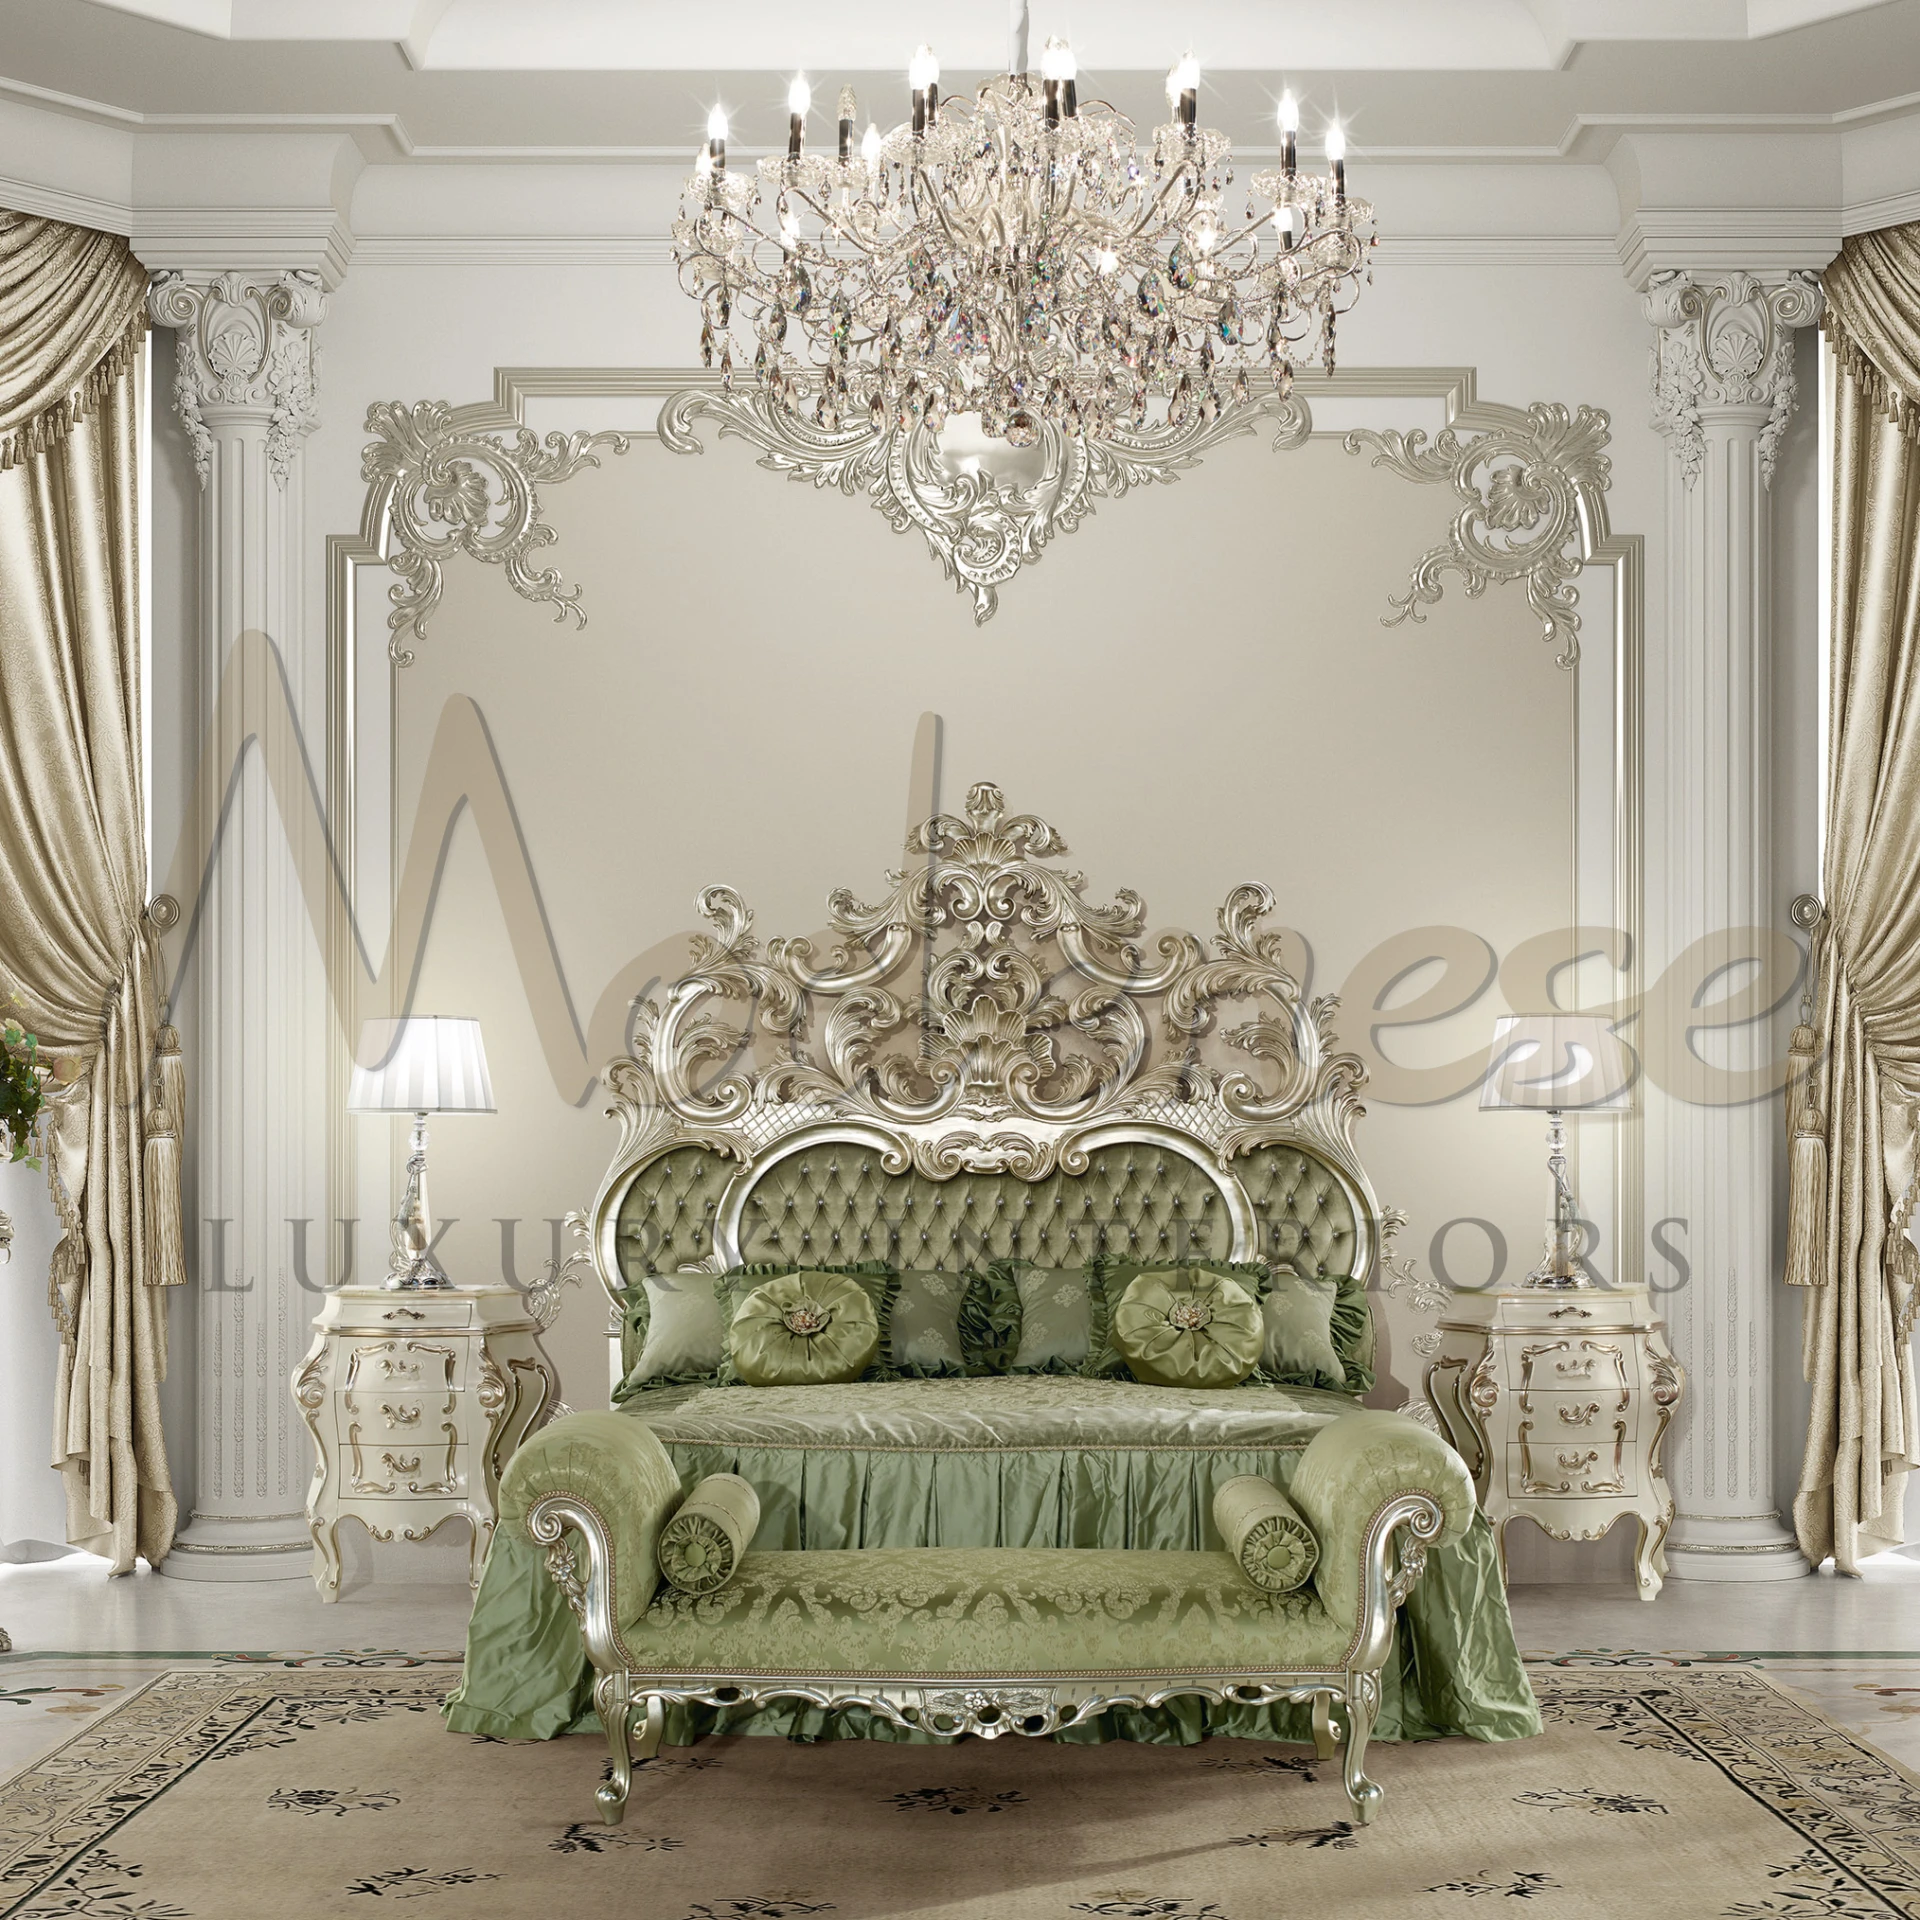 The bed is dressed in a sumptuous olive green fabric, with a quilted pattern on the mattress and a collection of plush pillows and a bolster, all featuring decorative elements. 